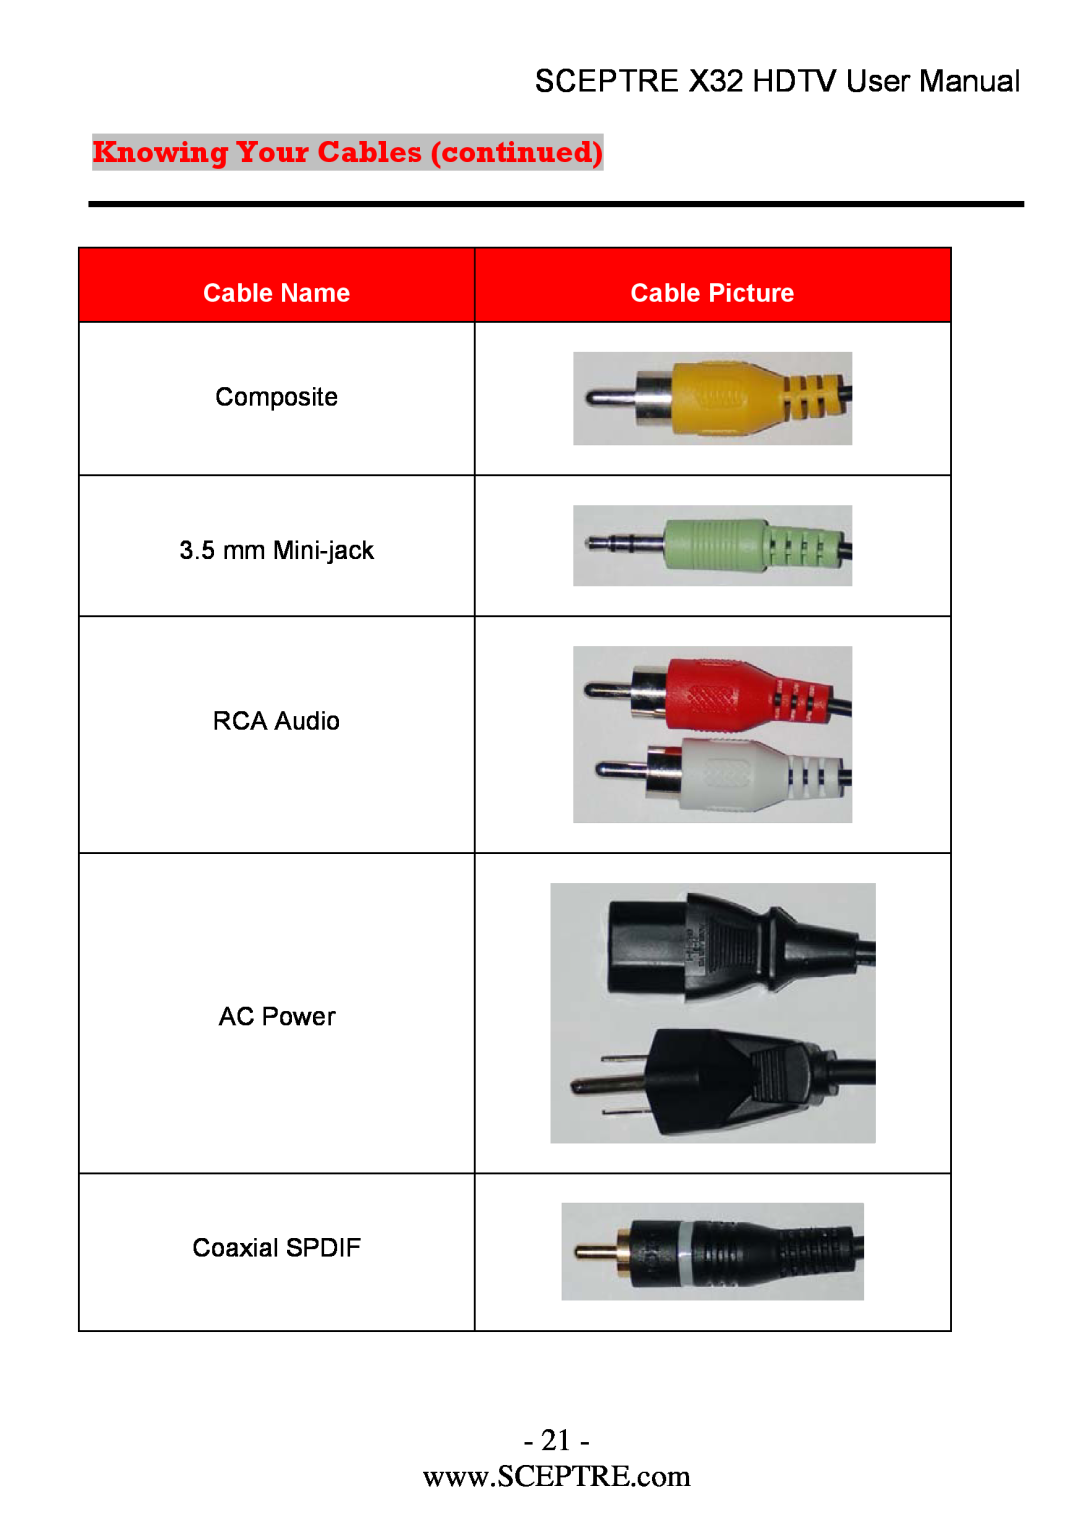 Sceptre Technologies x32 user manual Knowing Your Cables continued, SCEPTRE X32 HDTV User Manual, Cable Name, Cable Picture 